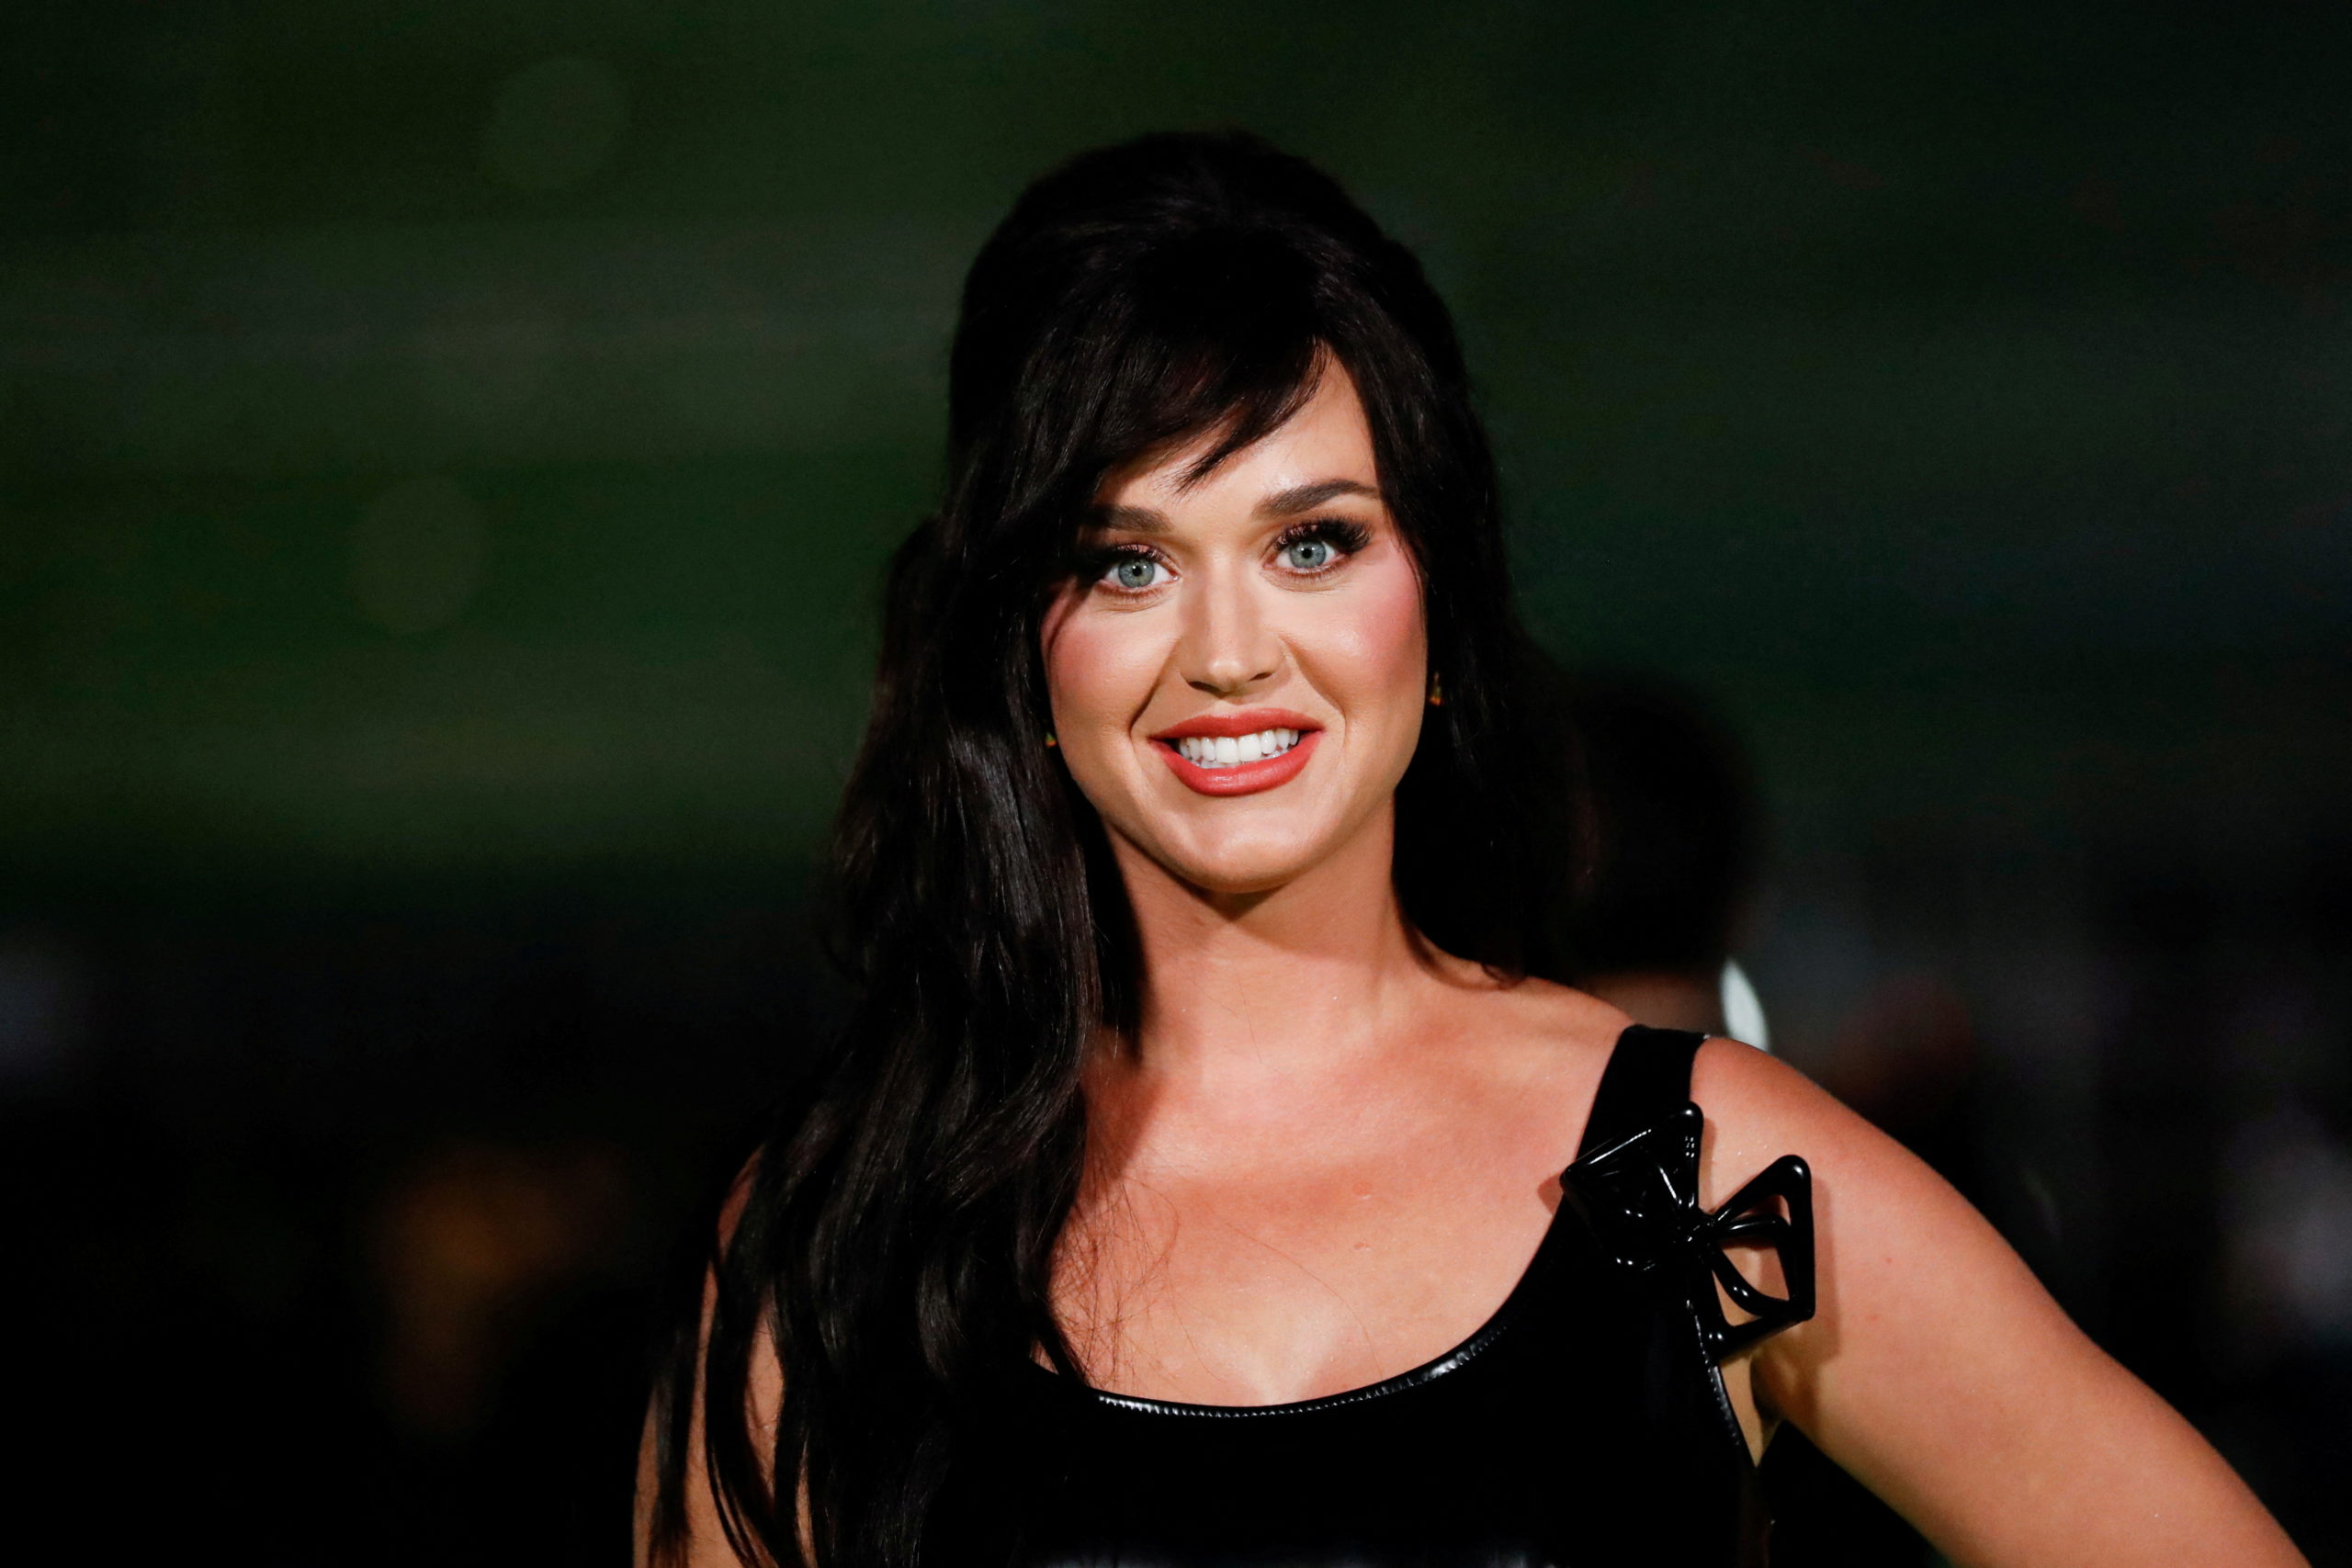 Singer Katy Perry poses at the Academy Museum of Motion Pictures gala in Los Angeles, California, U.S. September 25, 2021. REUTERS/Mario Anzuoni